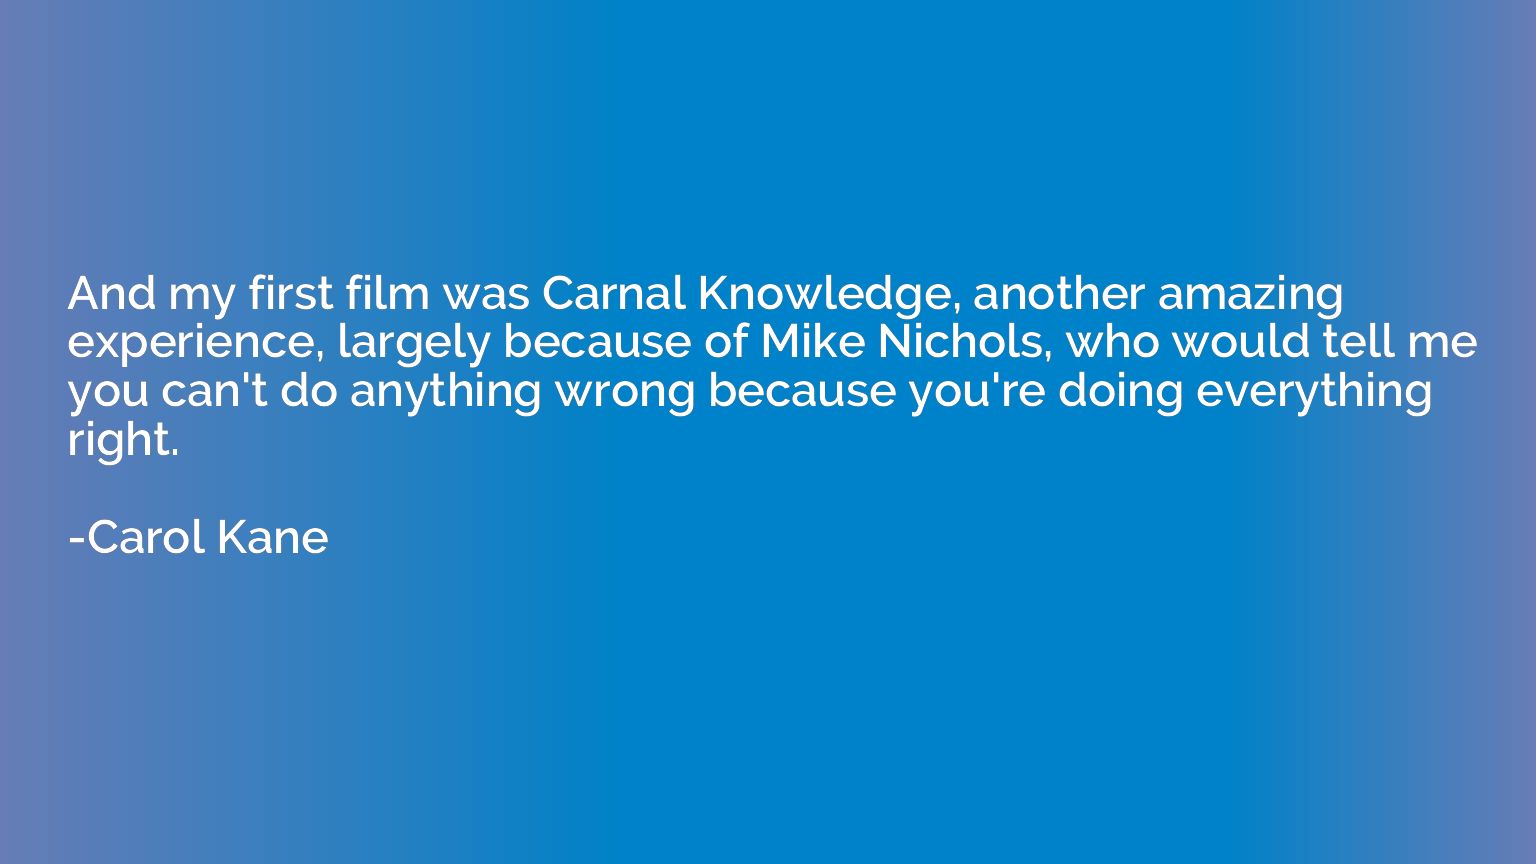 And my first film was Carnal Knowledge, another amazing expe